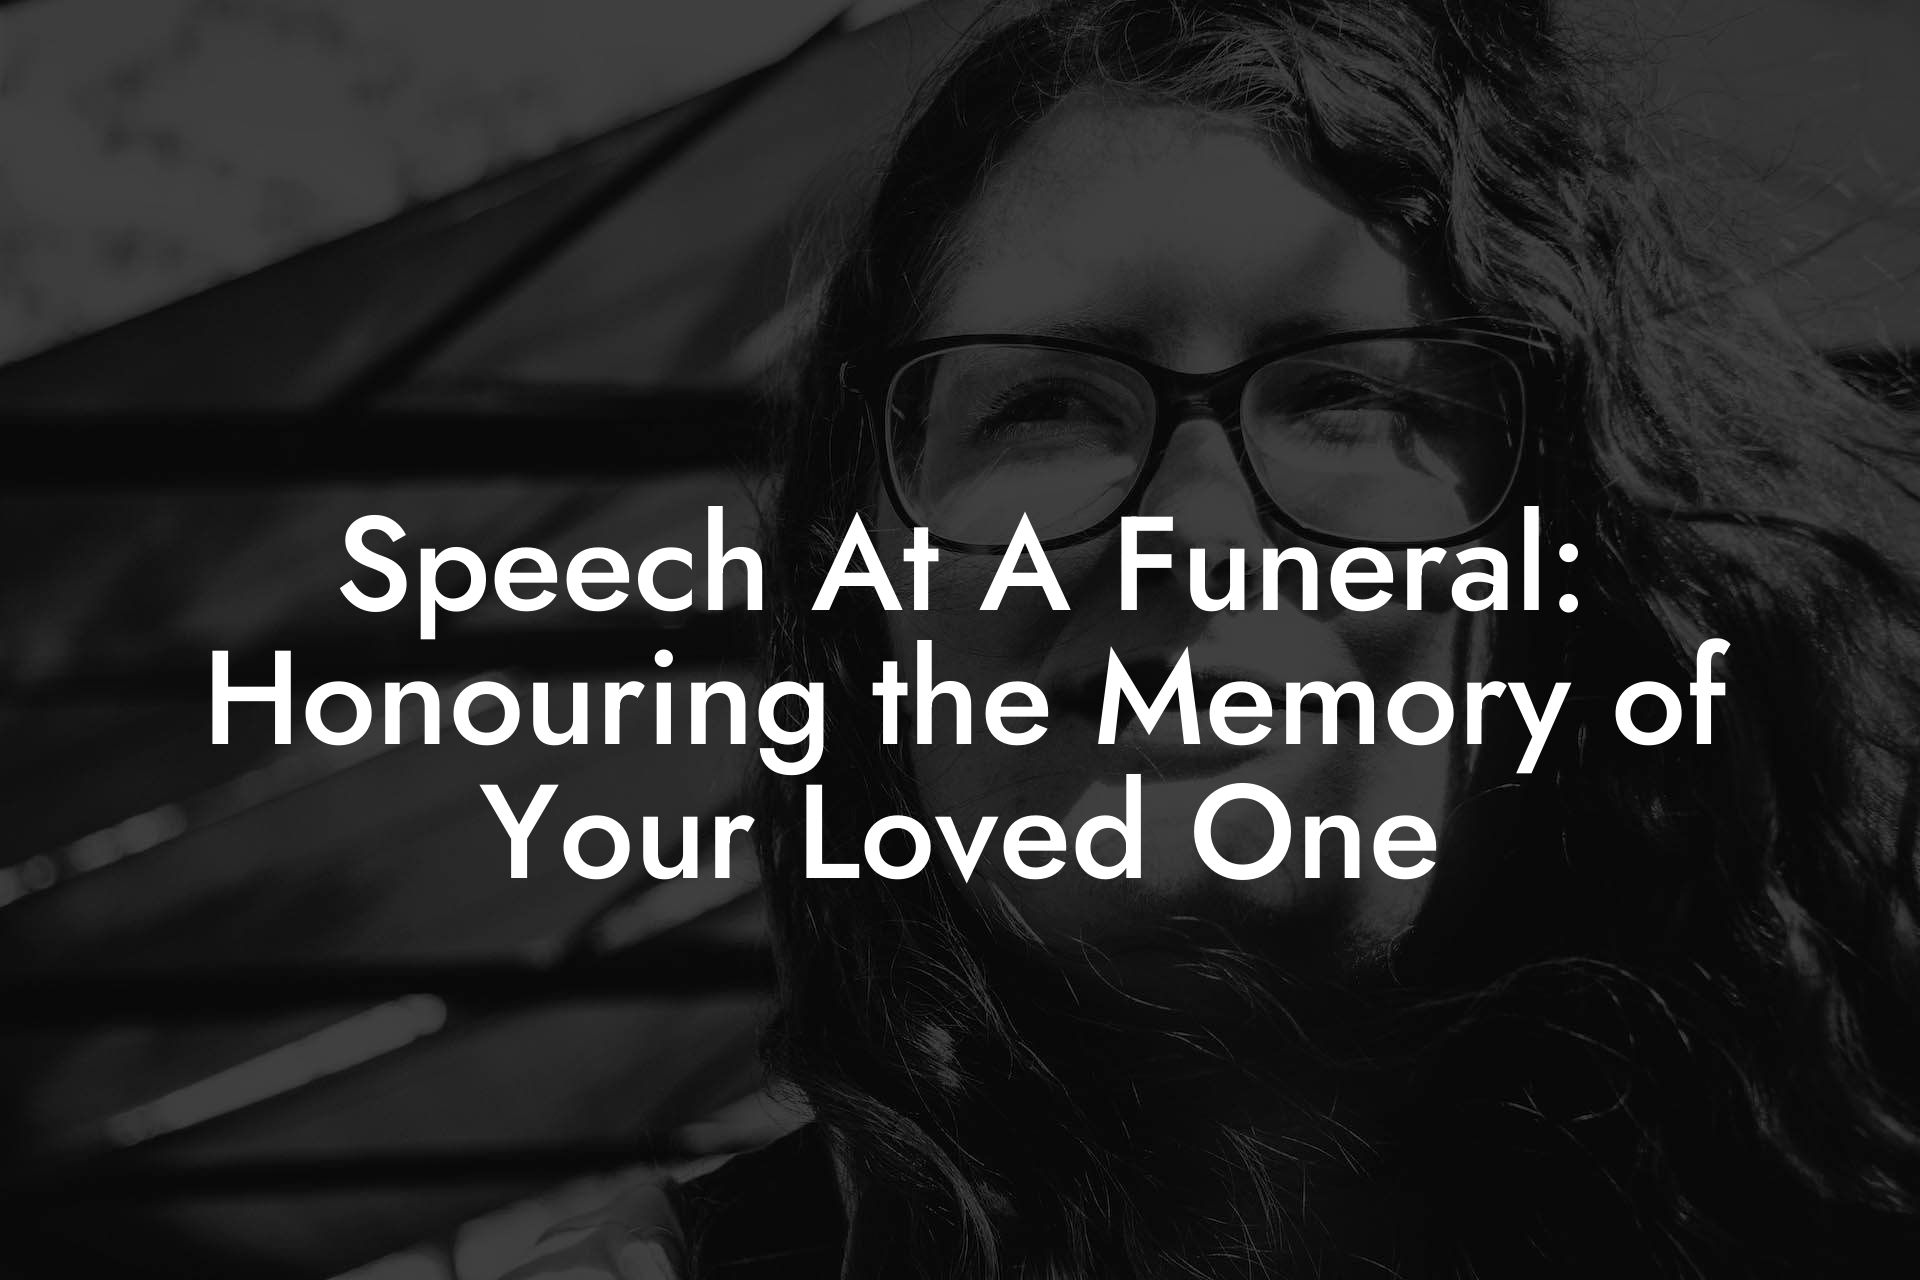 Speech At A Funeral: Honouring the Memory of Your Loved One